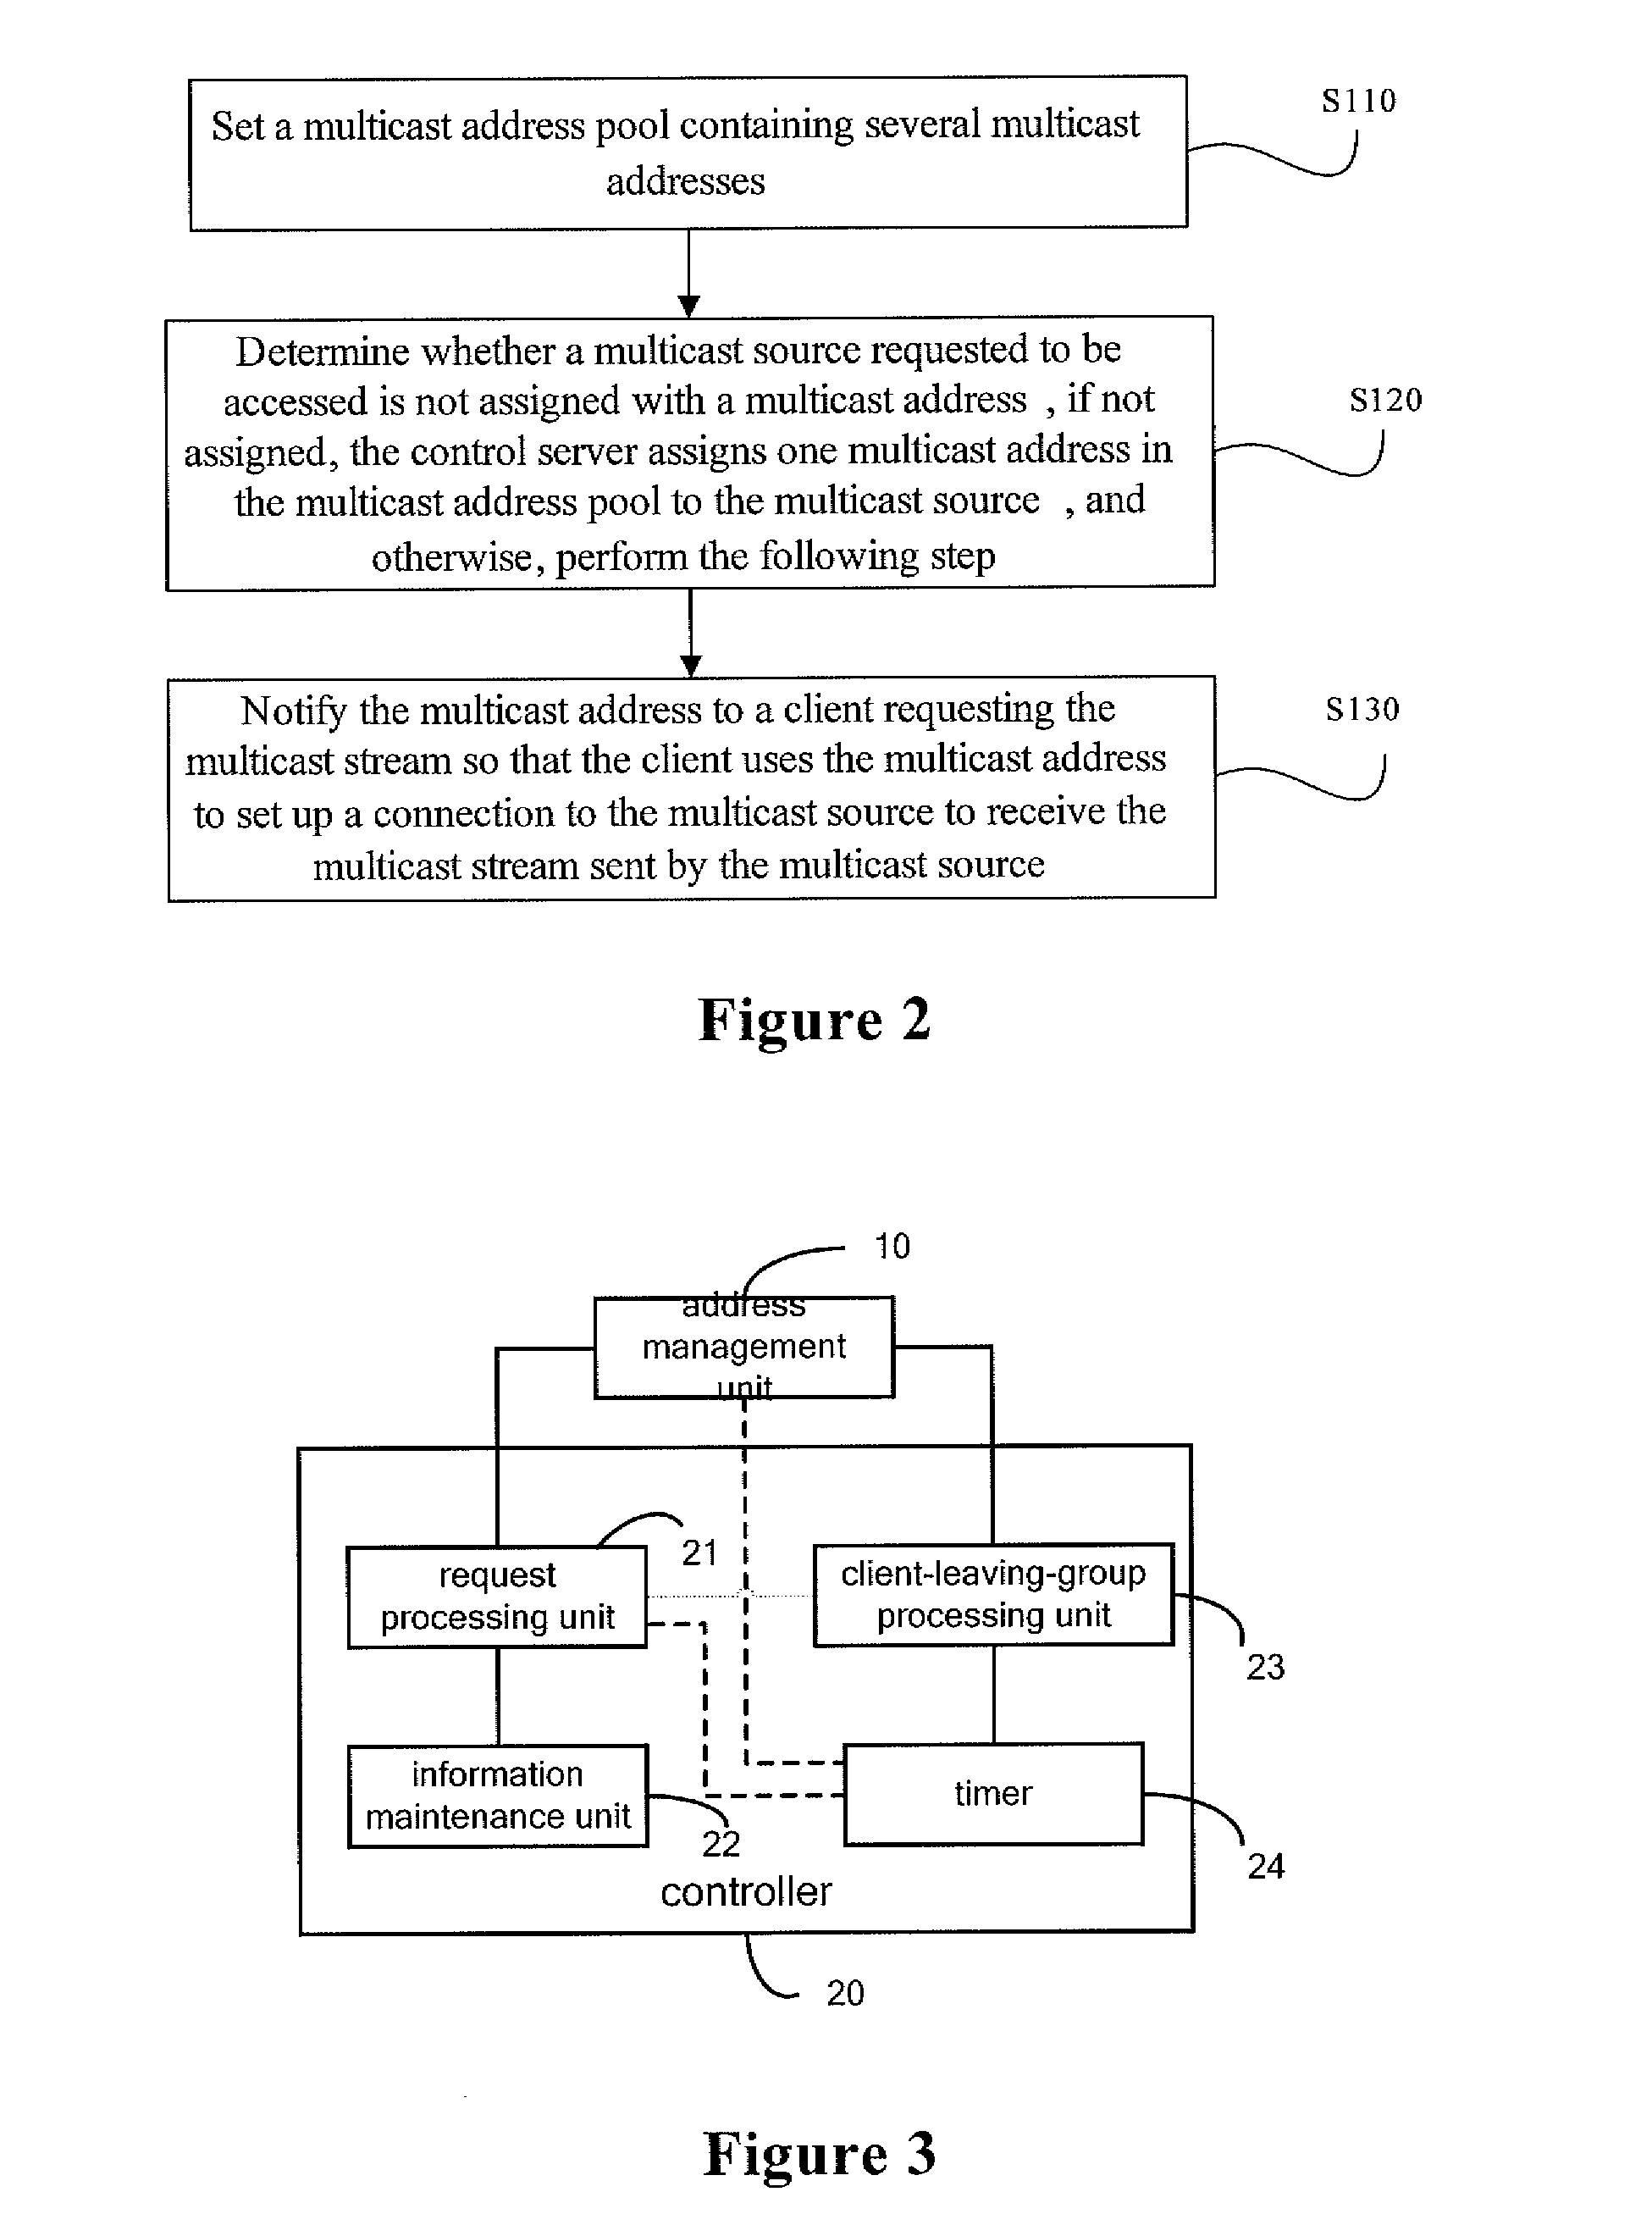 Method for deploying multicast network, multicast network and control server